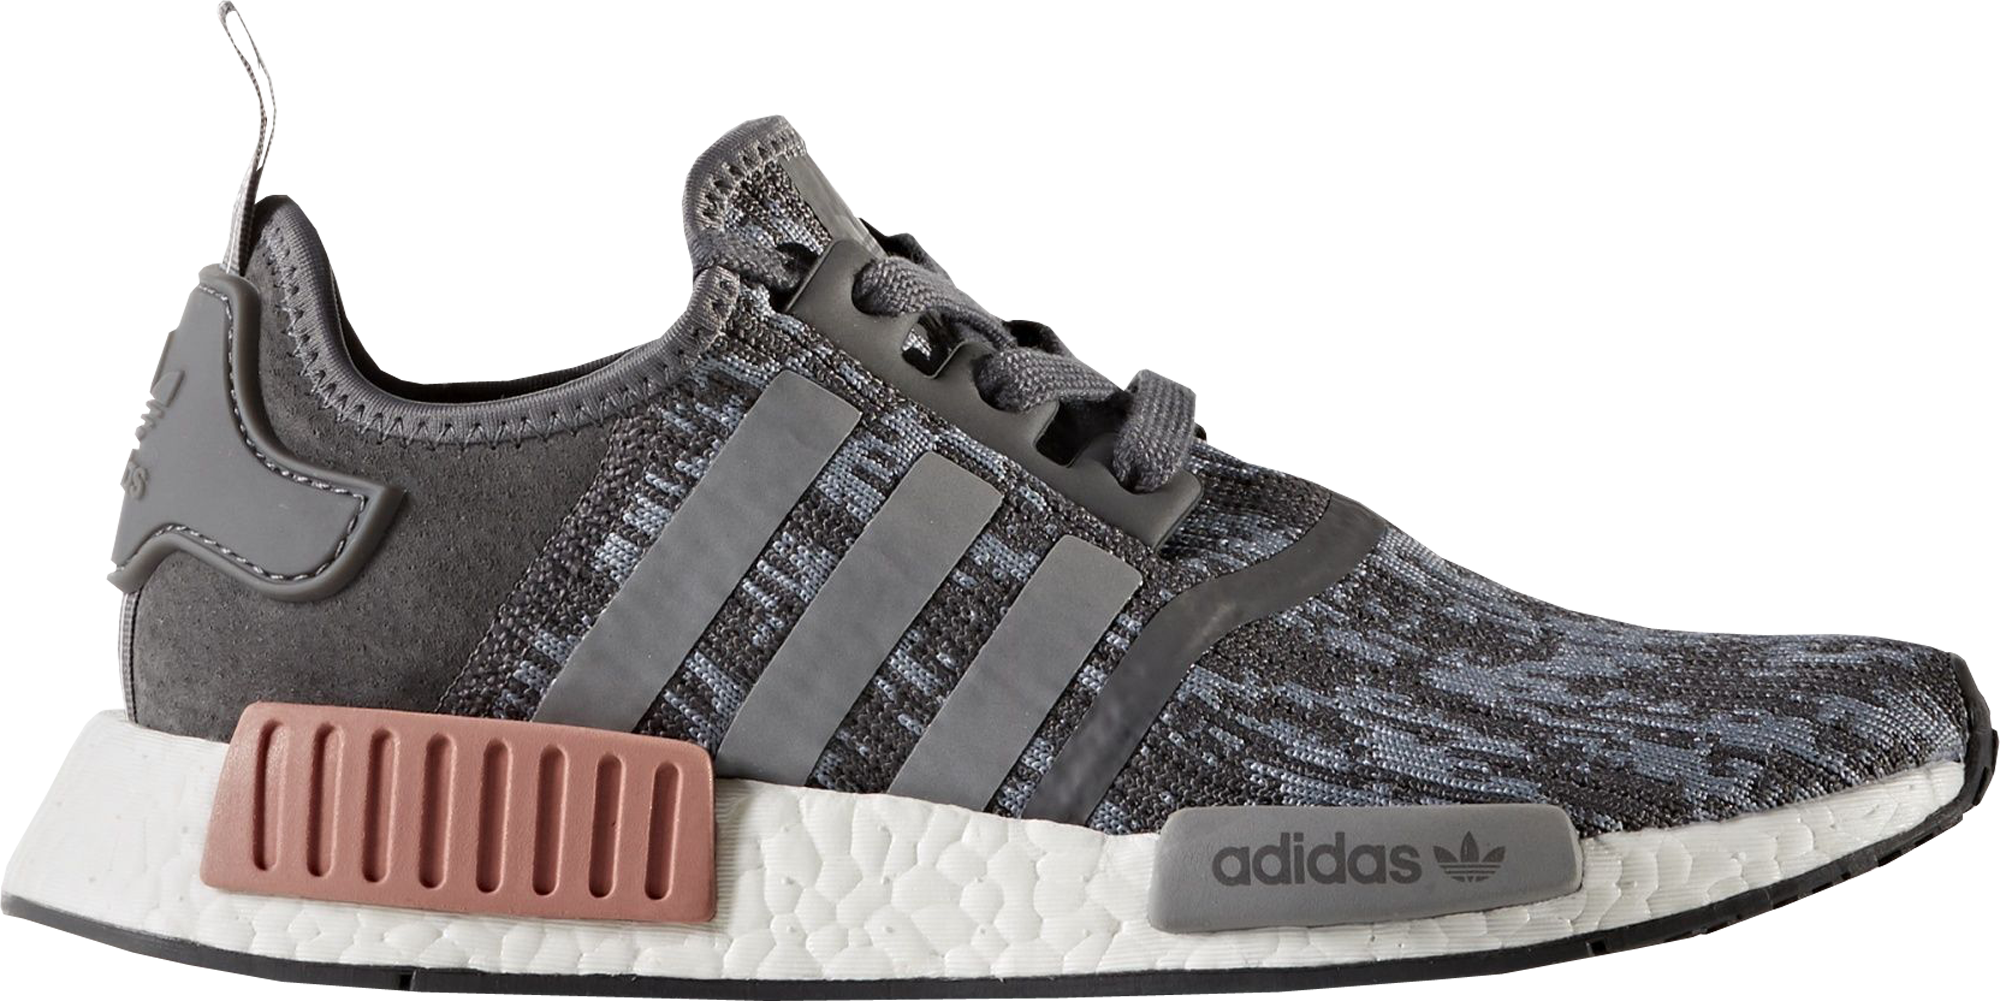 nmd womens gray and pink